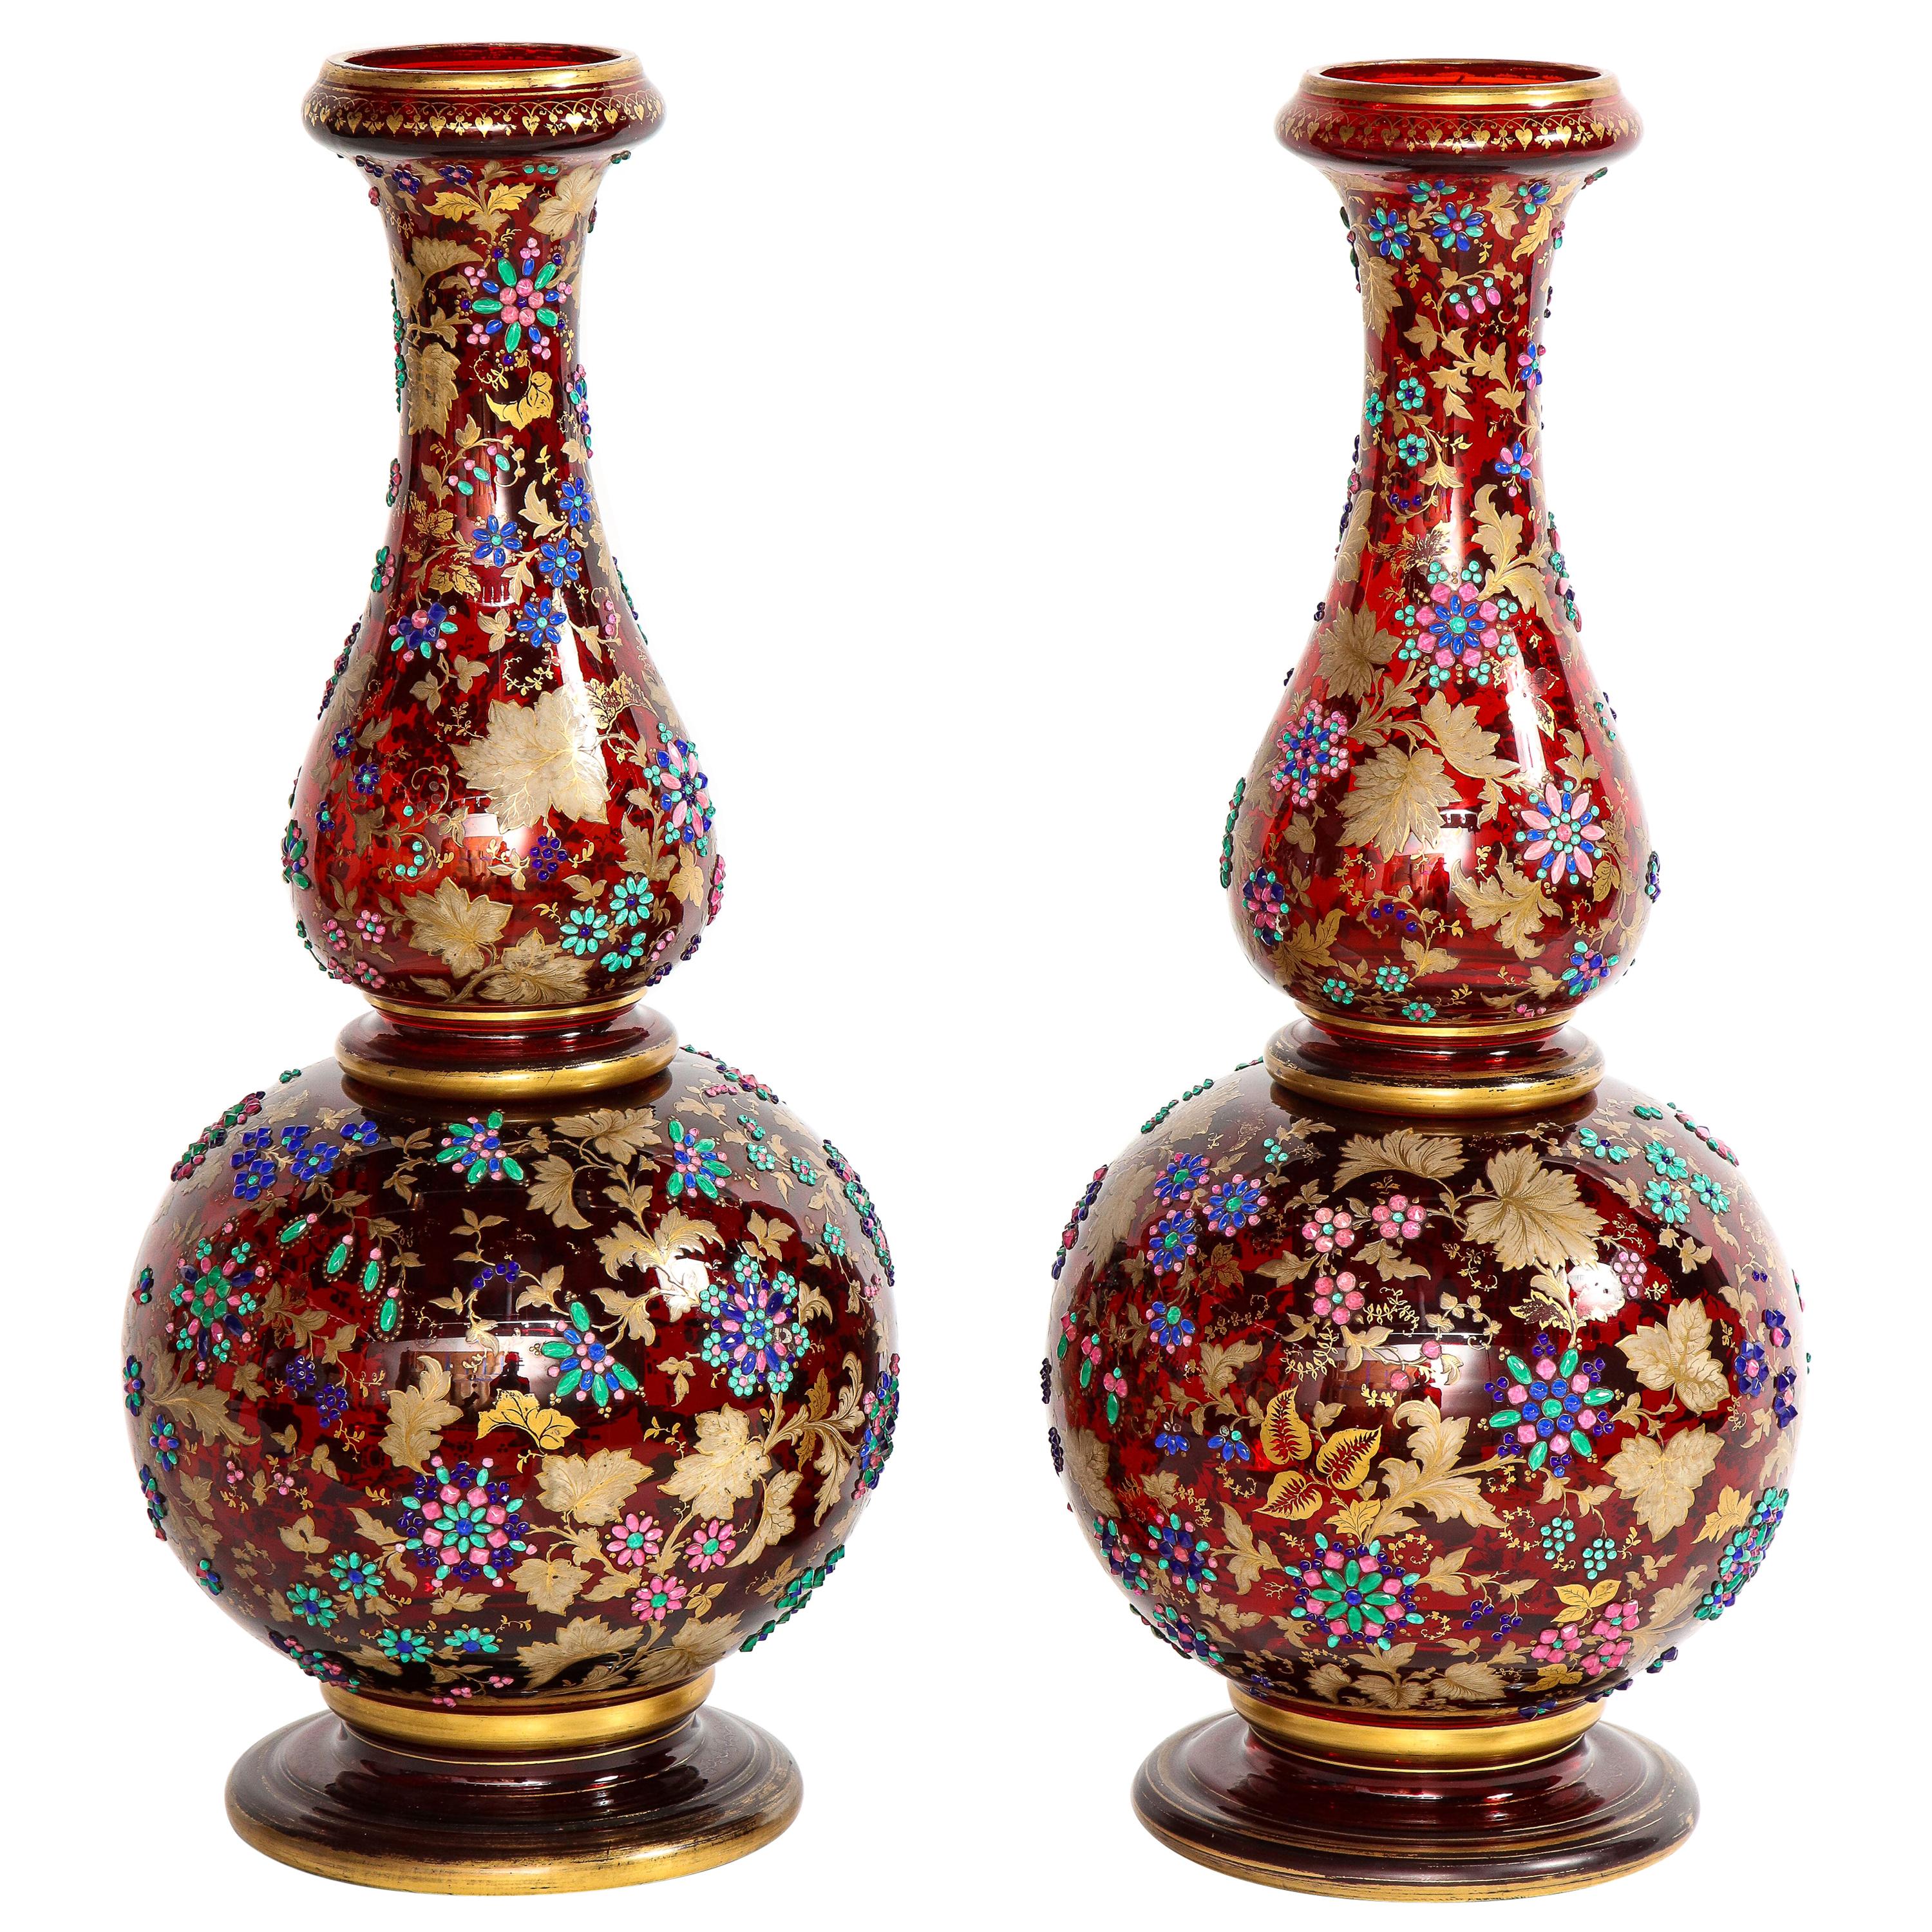 Monumental Pr Moser jeweled Ruby-Red Overlay Two-Piece 24k Gold, Enameled Vases